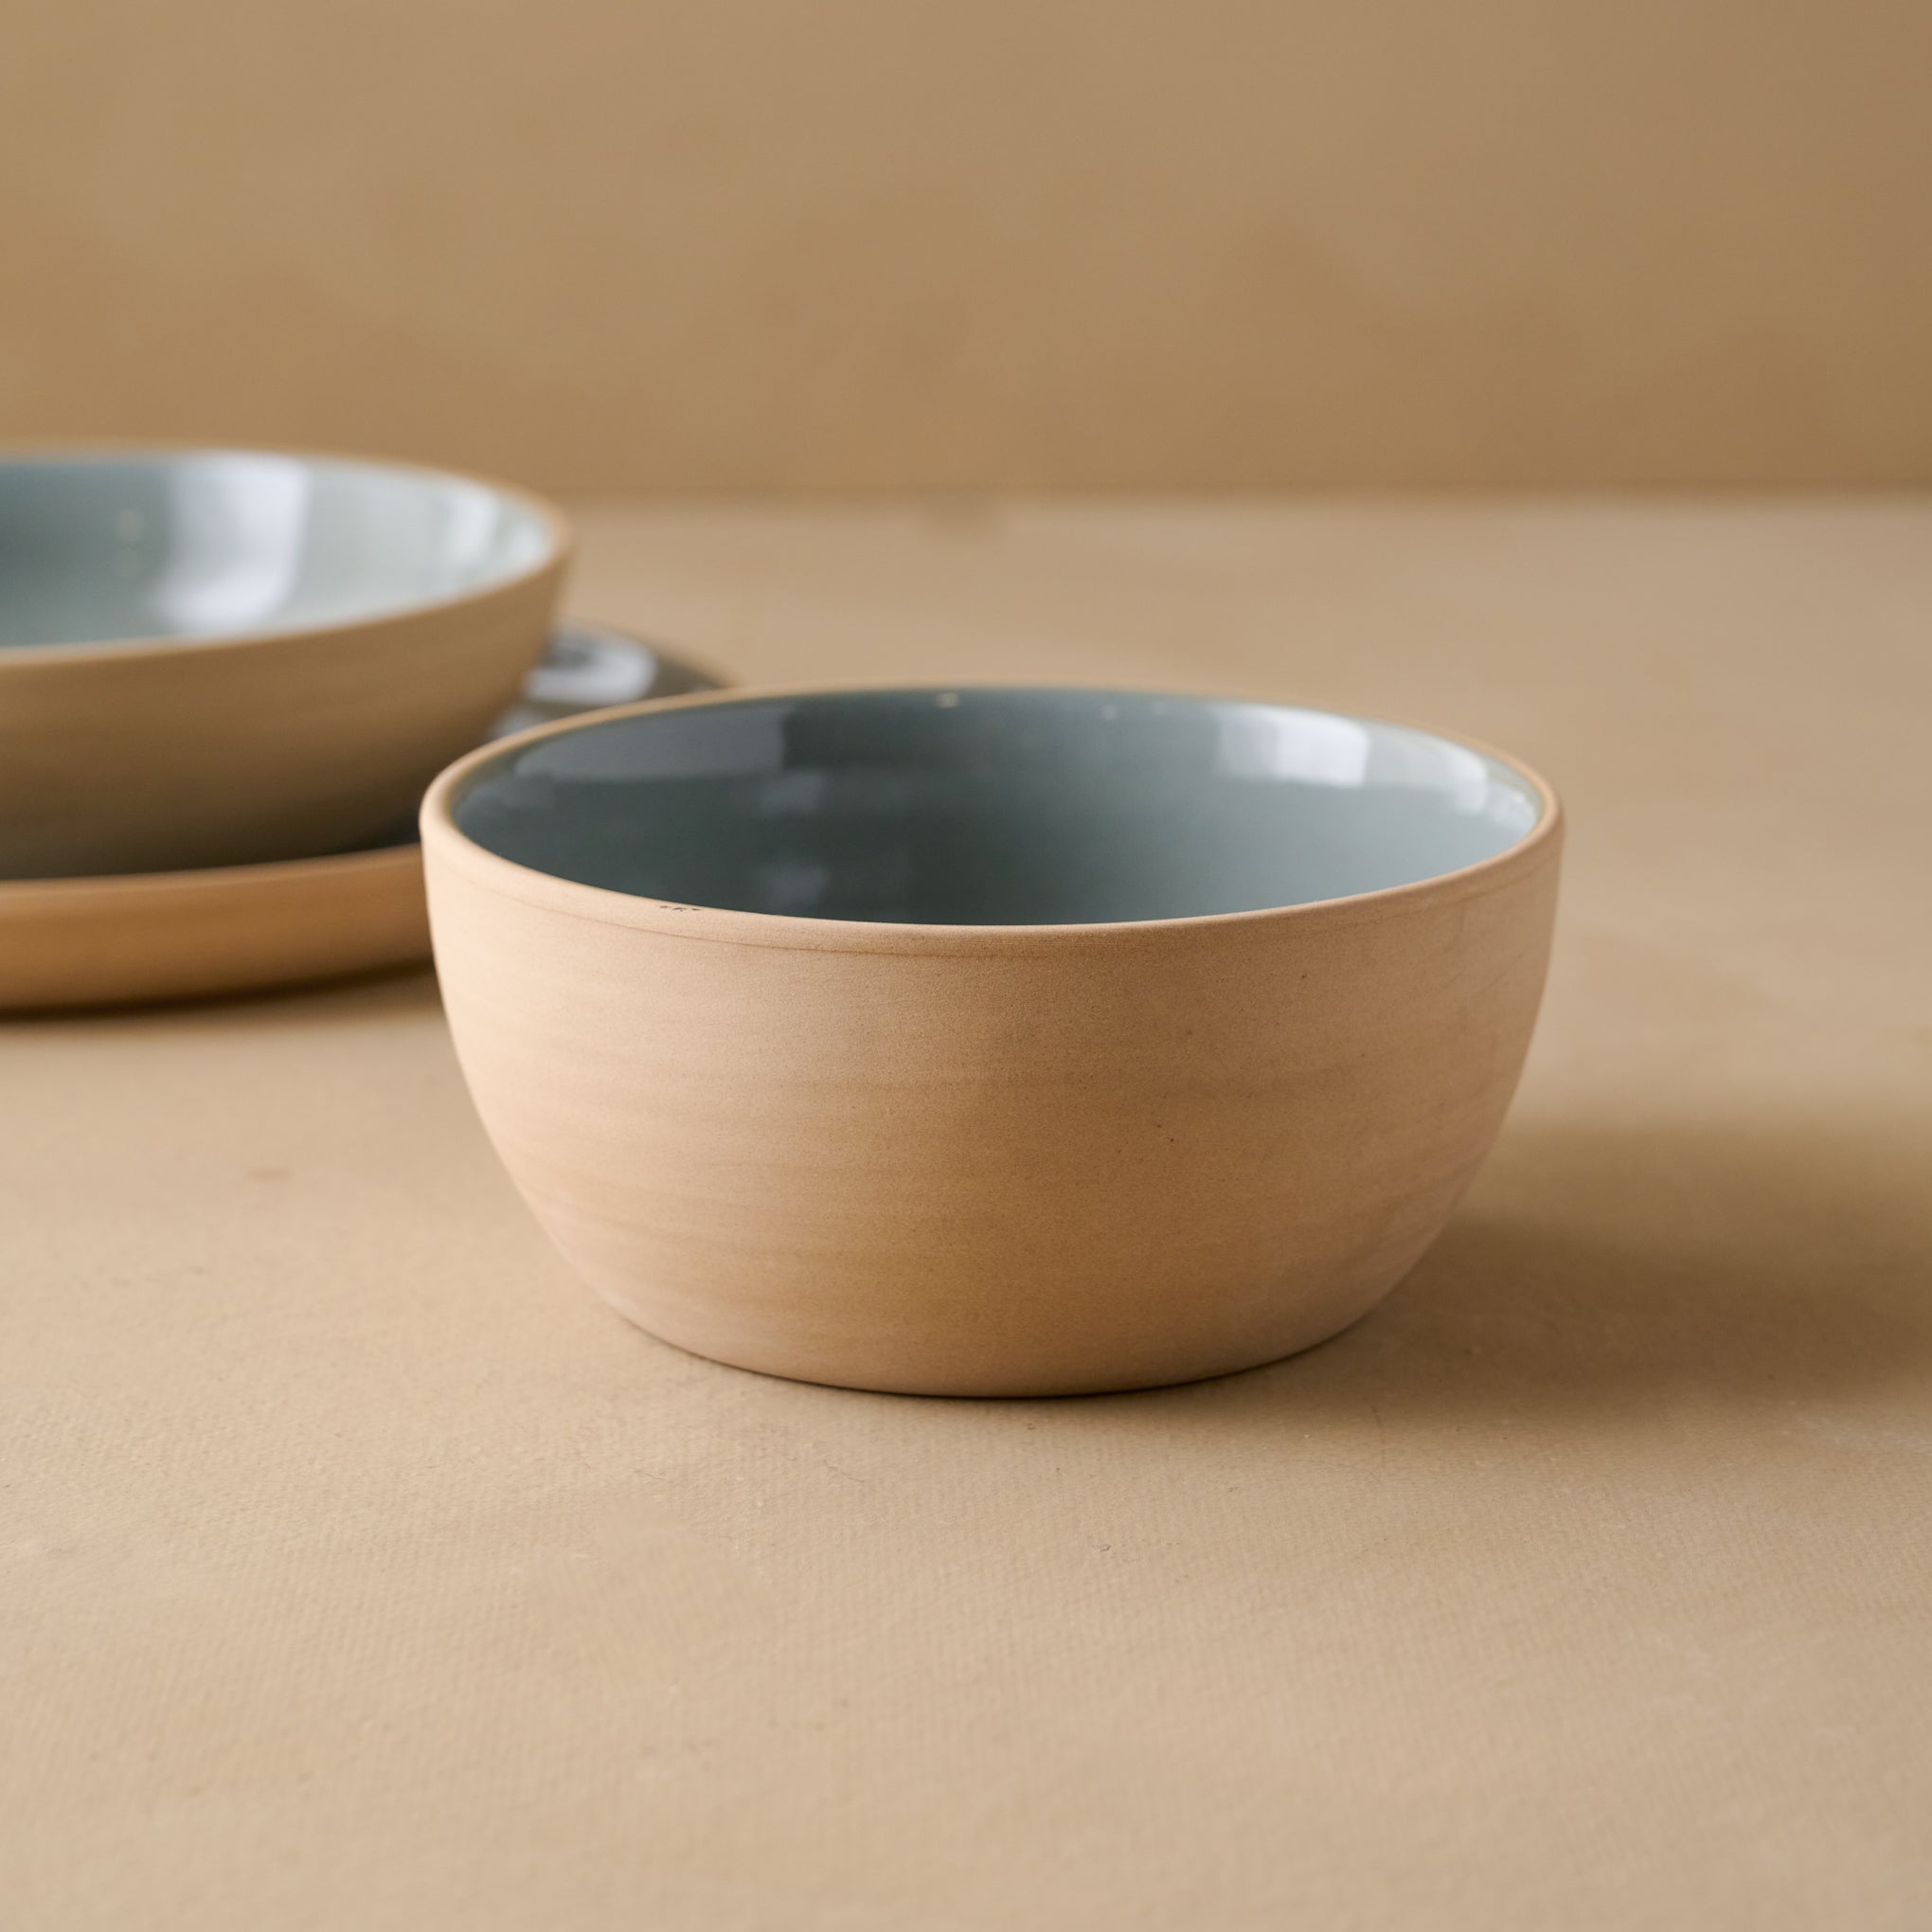 Lakelynn Cereal Bowl with blue glazed interior and tan exterior